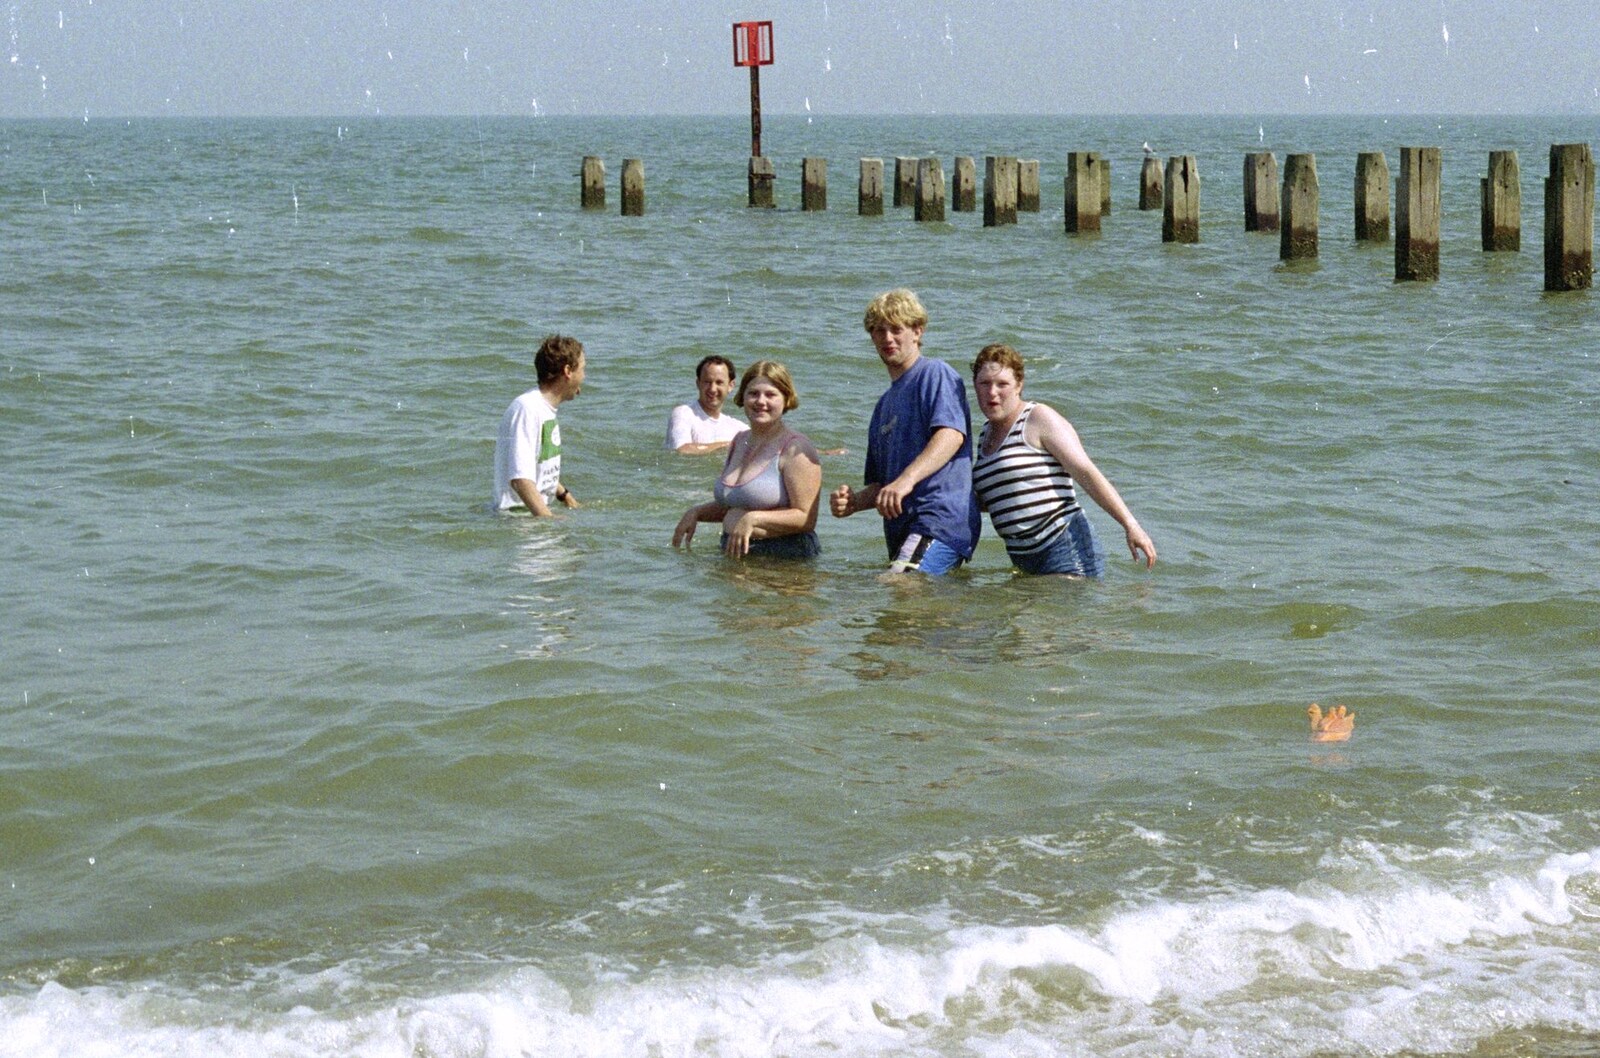 More of Apple, DH, Helen, Paul and Sally in the sea from The First BSCC Bike Ride to Southwold, Suffolk - 10th June 1996